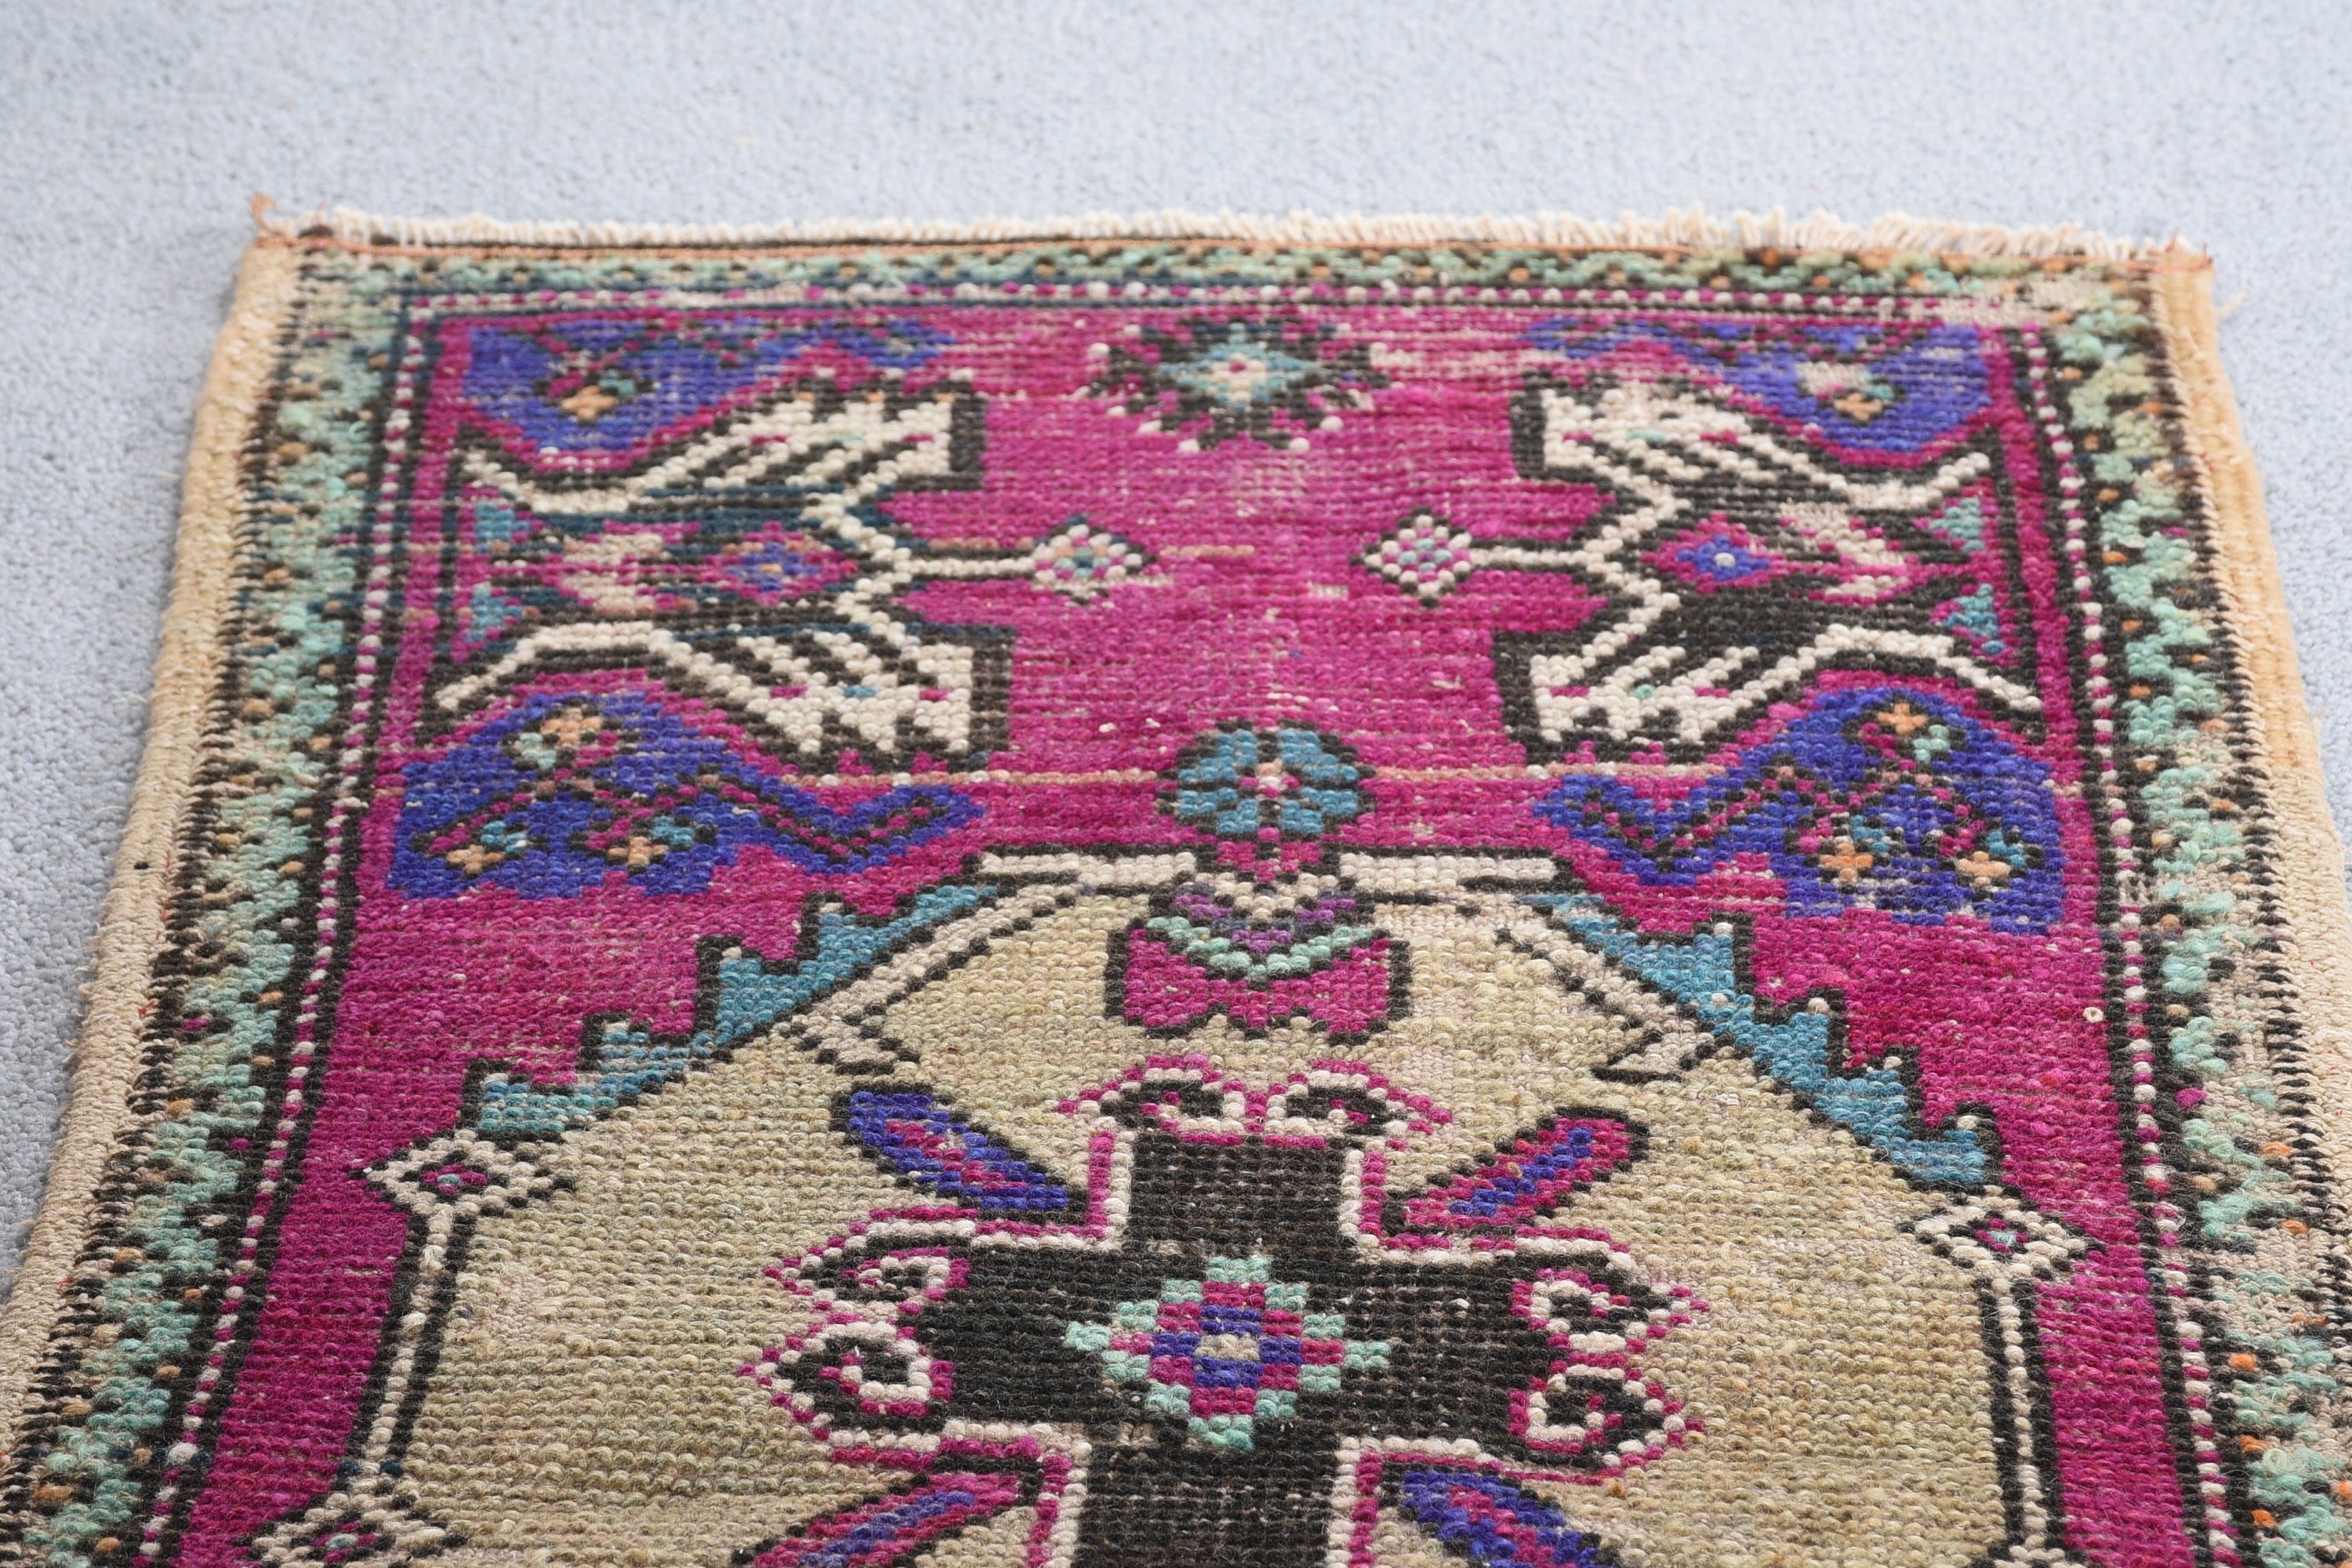 Vintage Rug, Rugs for Car Mat, 1.5x3 ft Small Rugs, Pink Moroccan Rugs, Kitchen Rug, Car Mat Rug, Wool Rugs, Anatolian Rugs, Turkish Rug